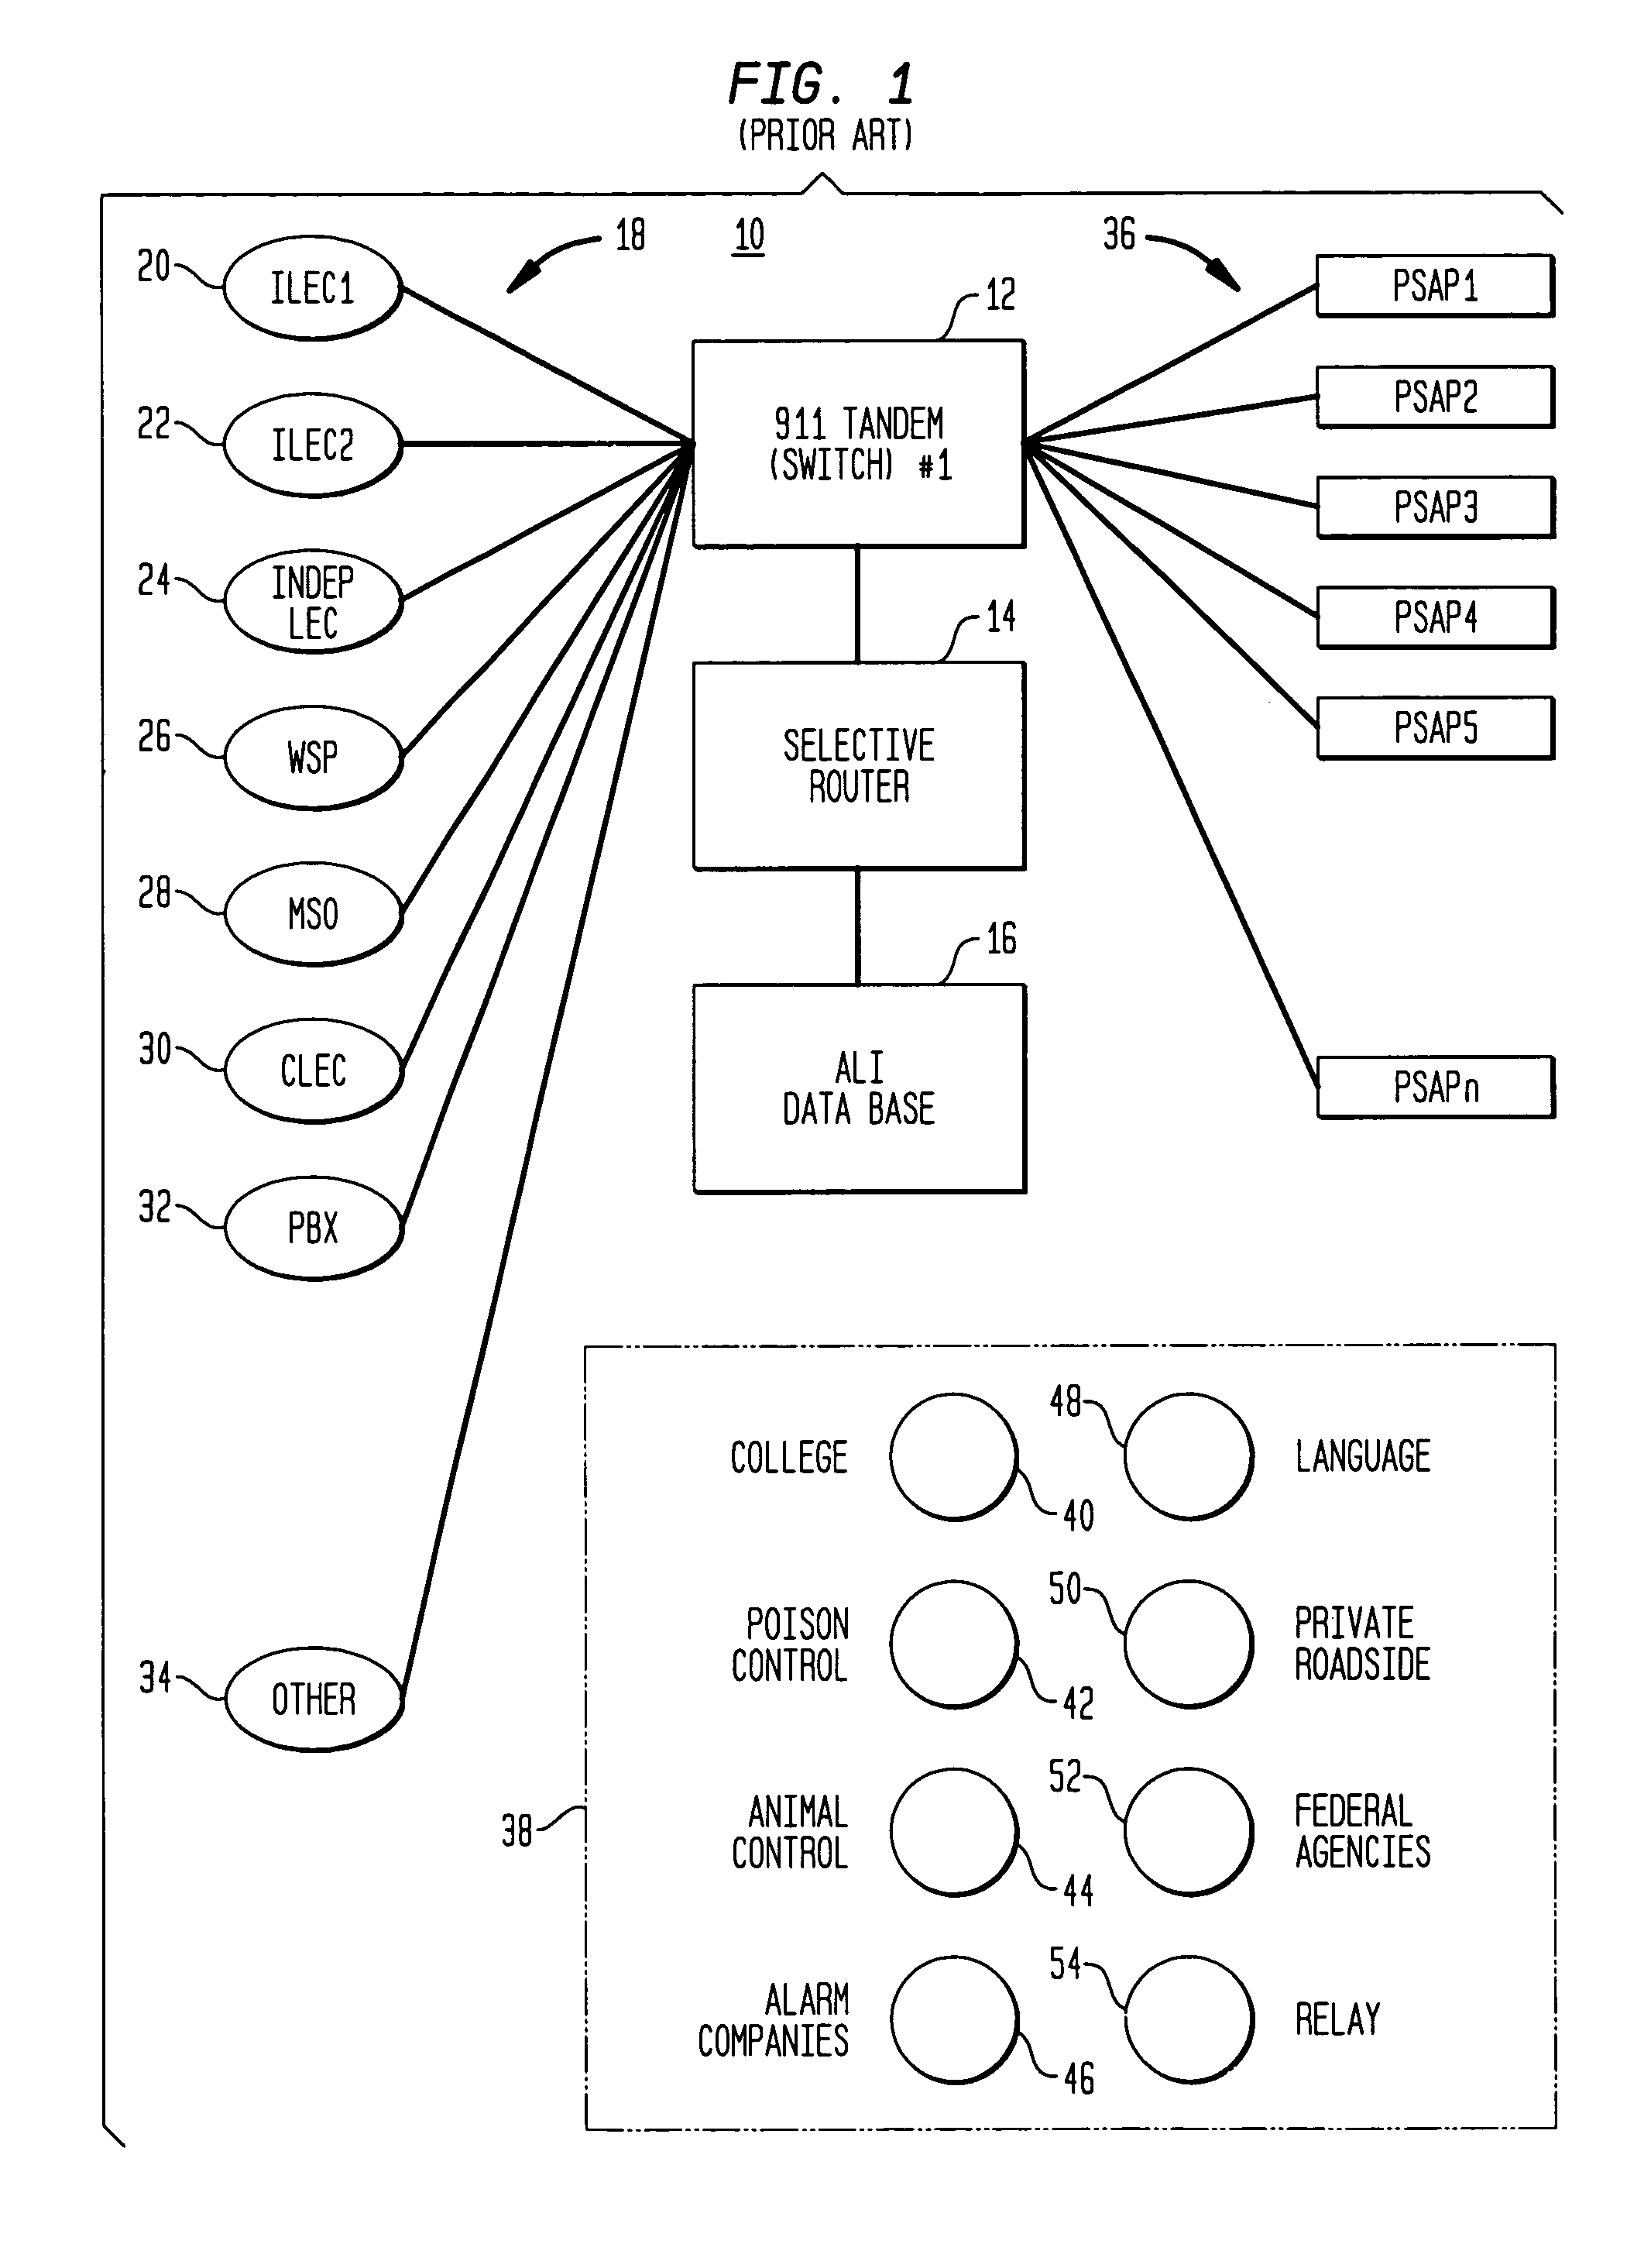 System and method for accessing personal information relating to a caller in a remote telecommunication network